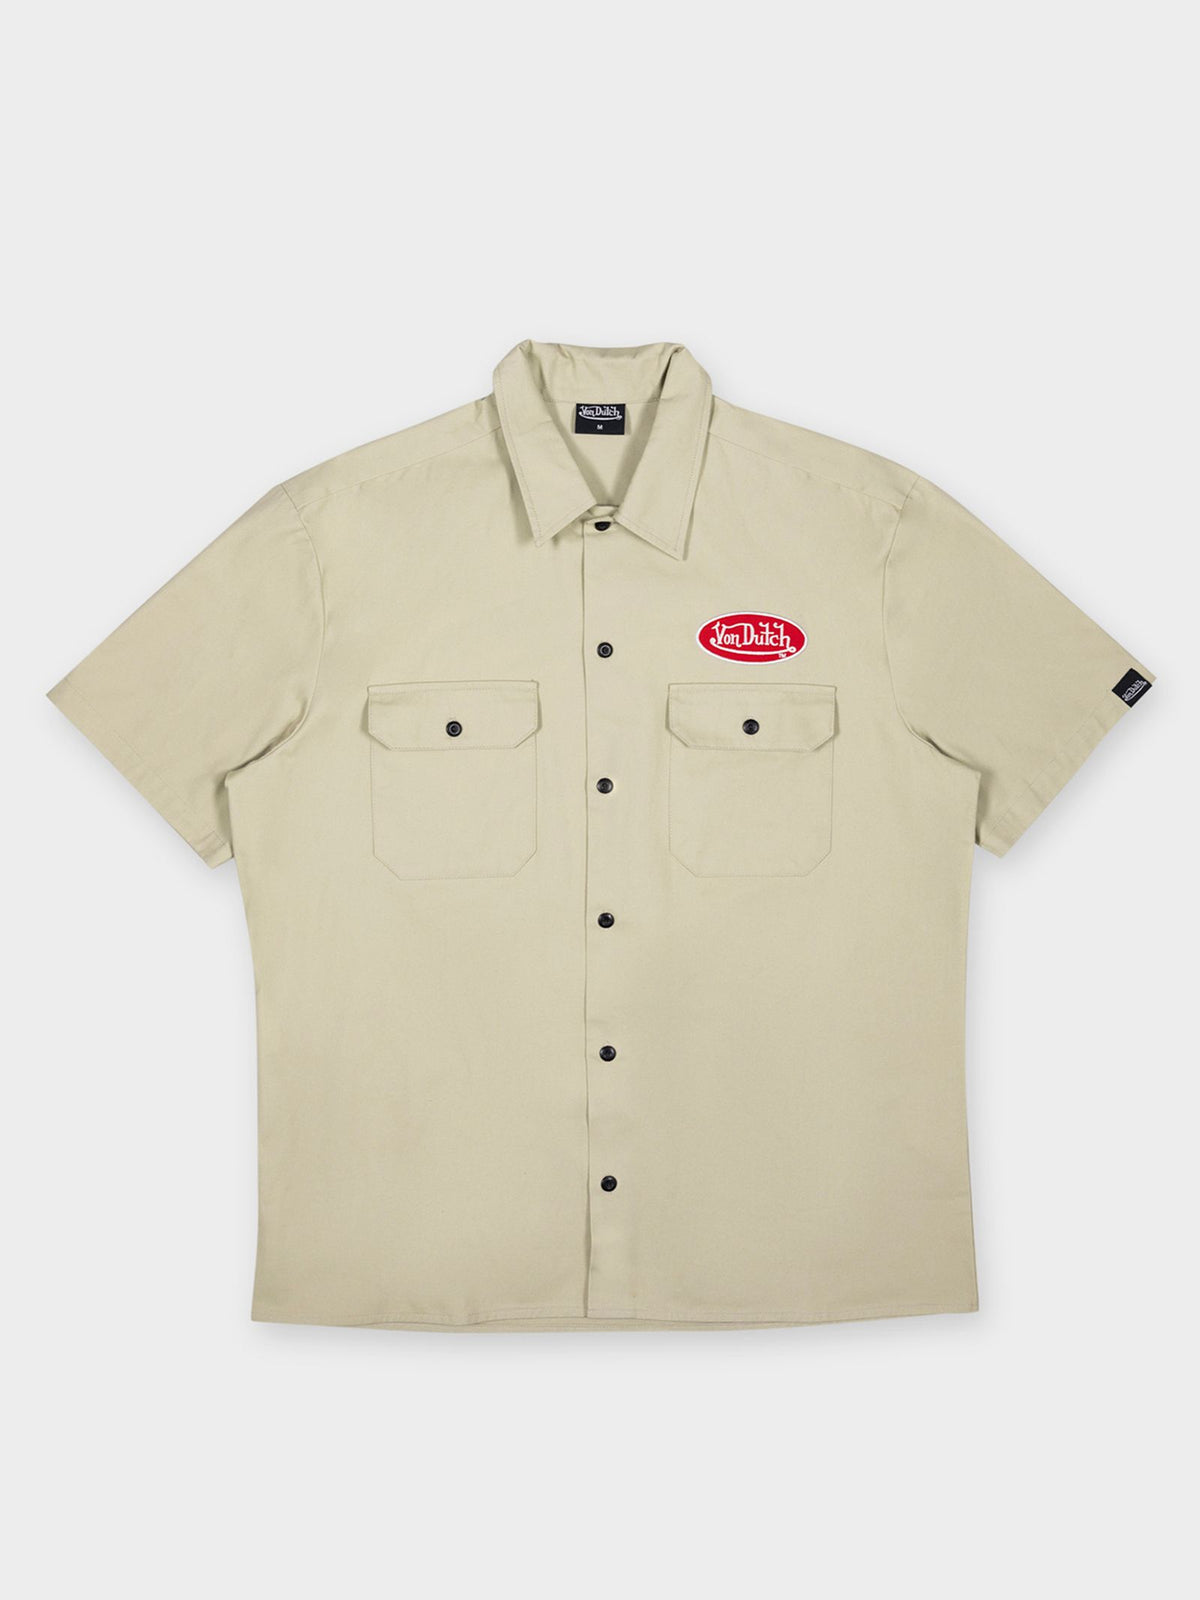 Unisex Short Sleeve Shirt in Taupe